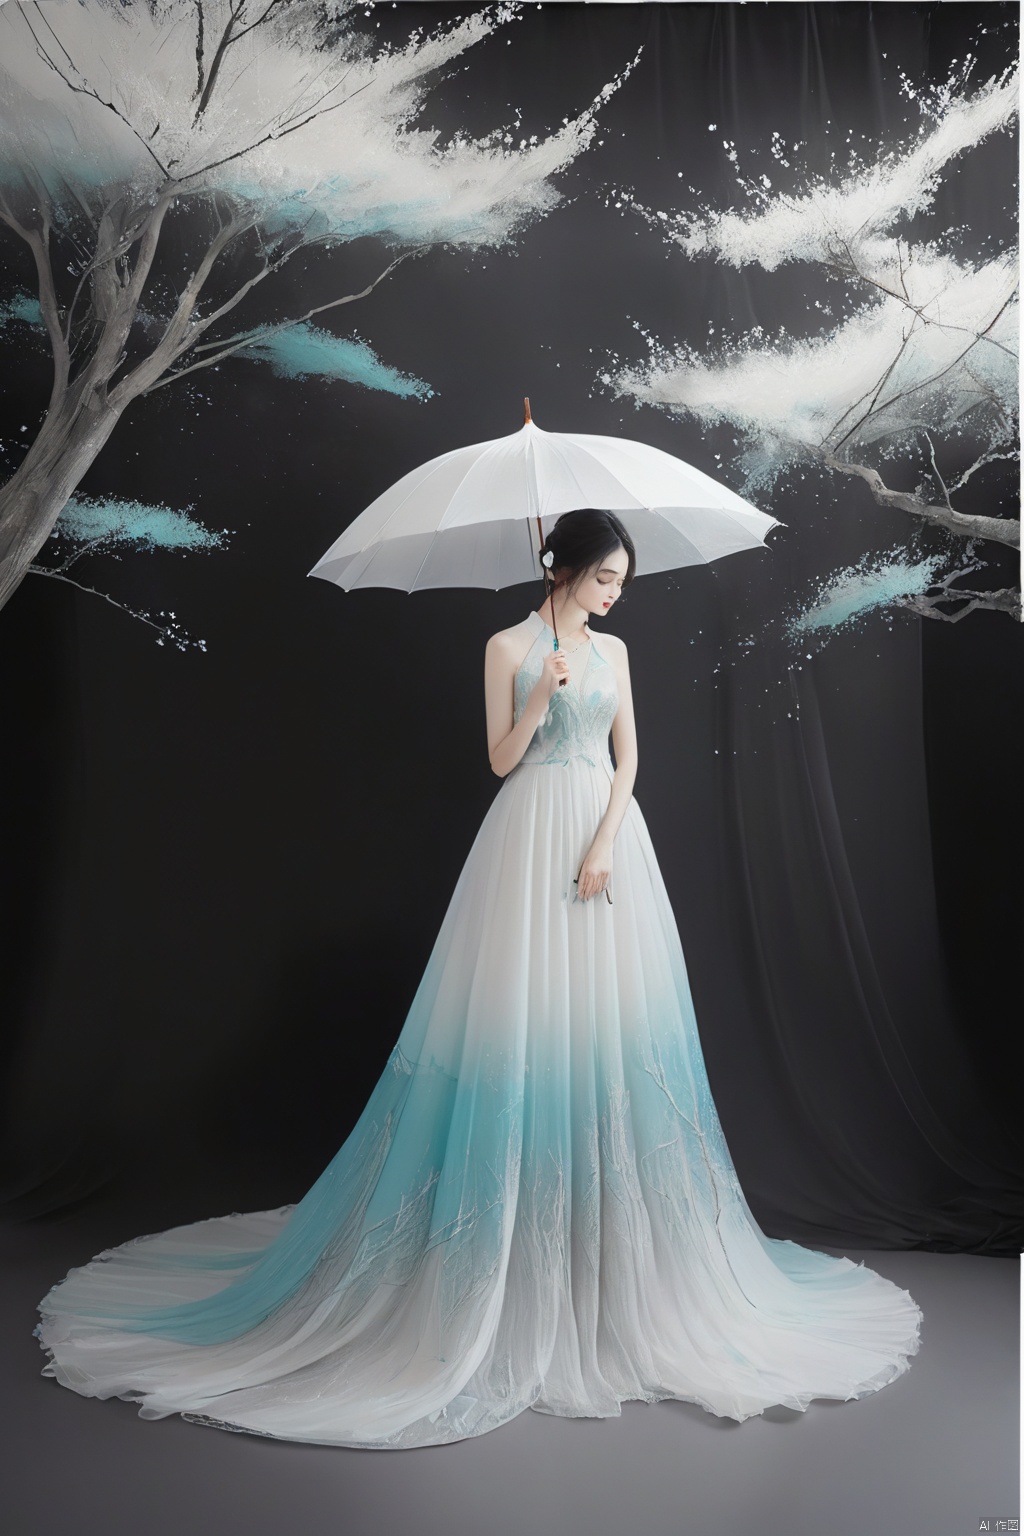  
/I Foreground a tree,  Chinese beauty holding an umbrella, cyan and white color matching, ink painting minimalist style, large white space, tulle translucent material, soft gradient, perspective aesthetics